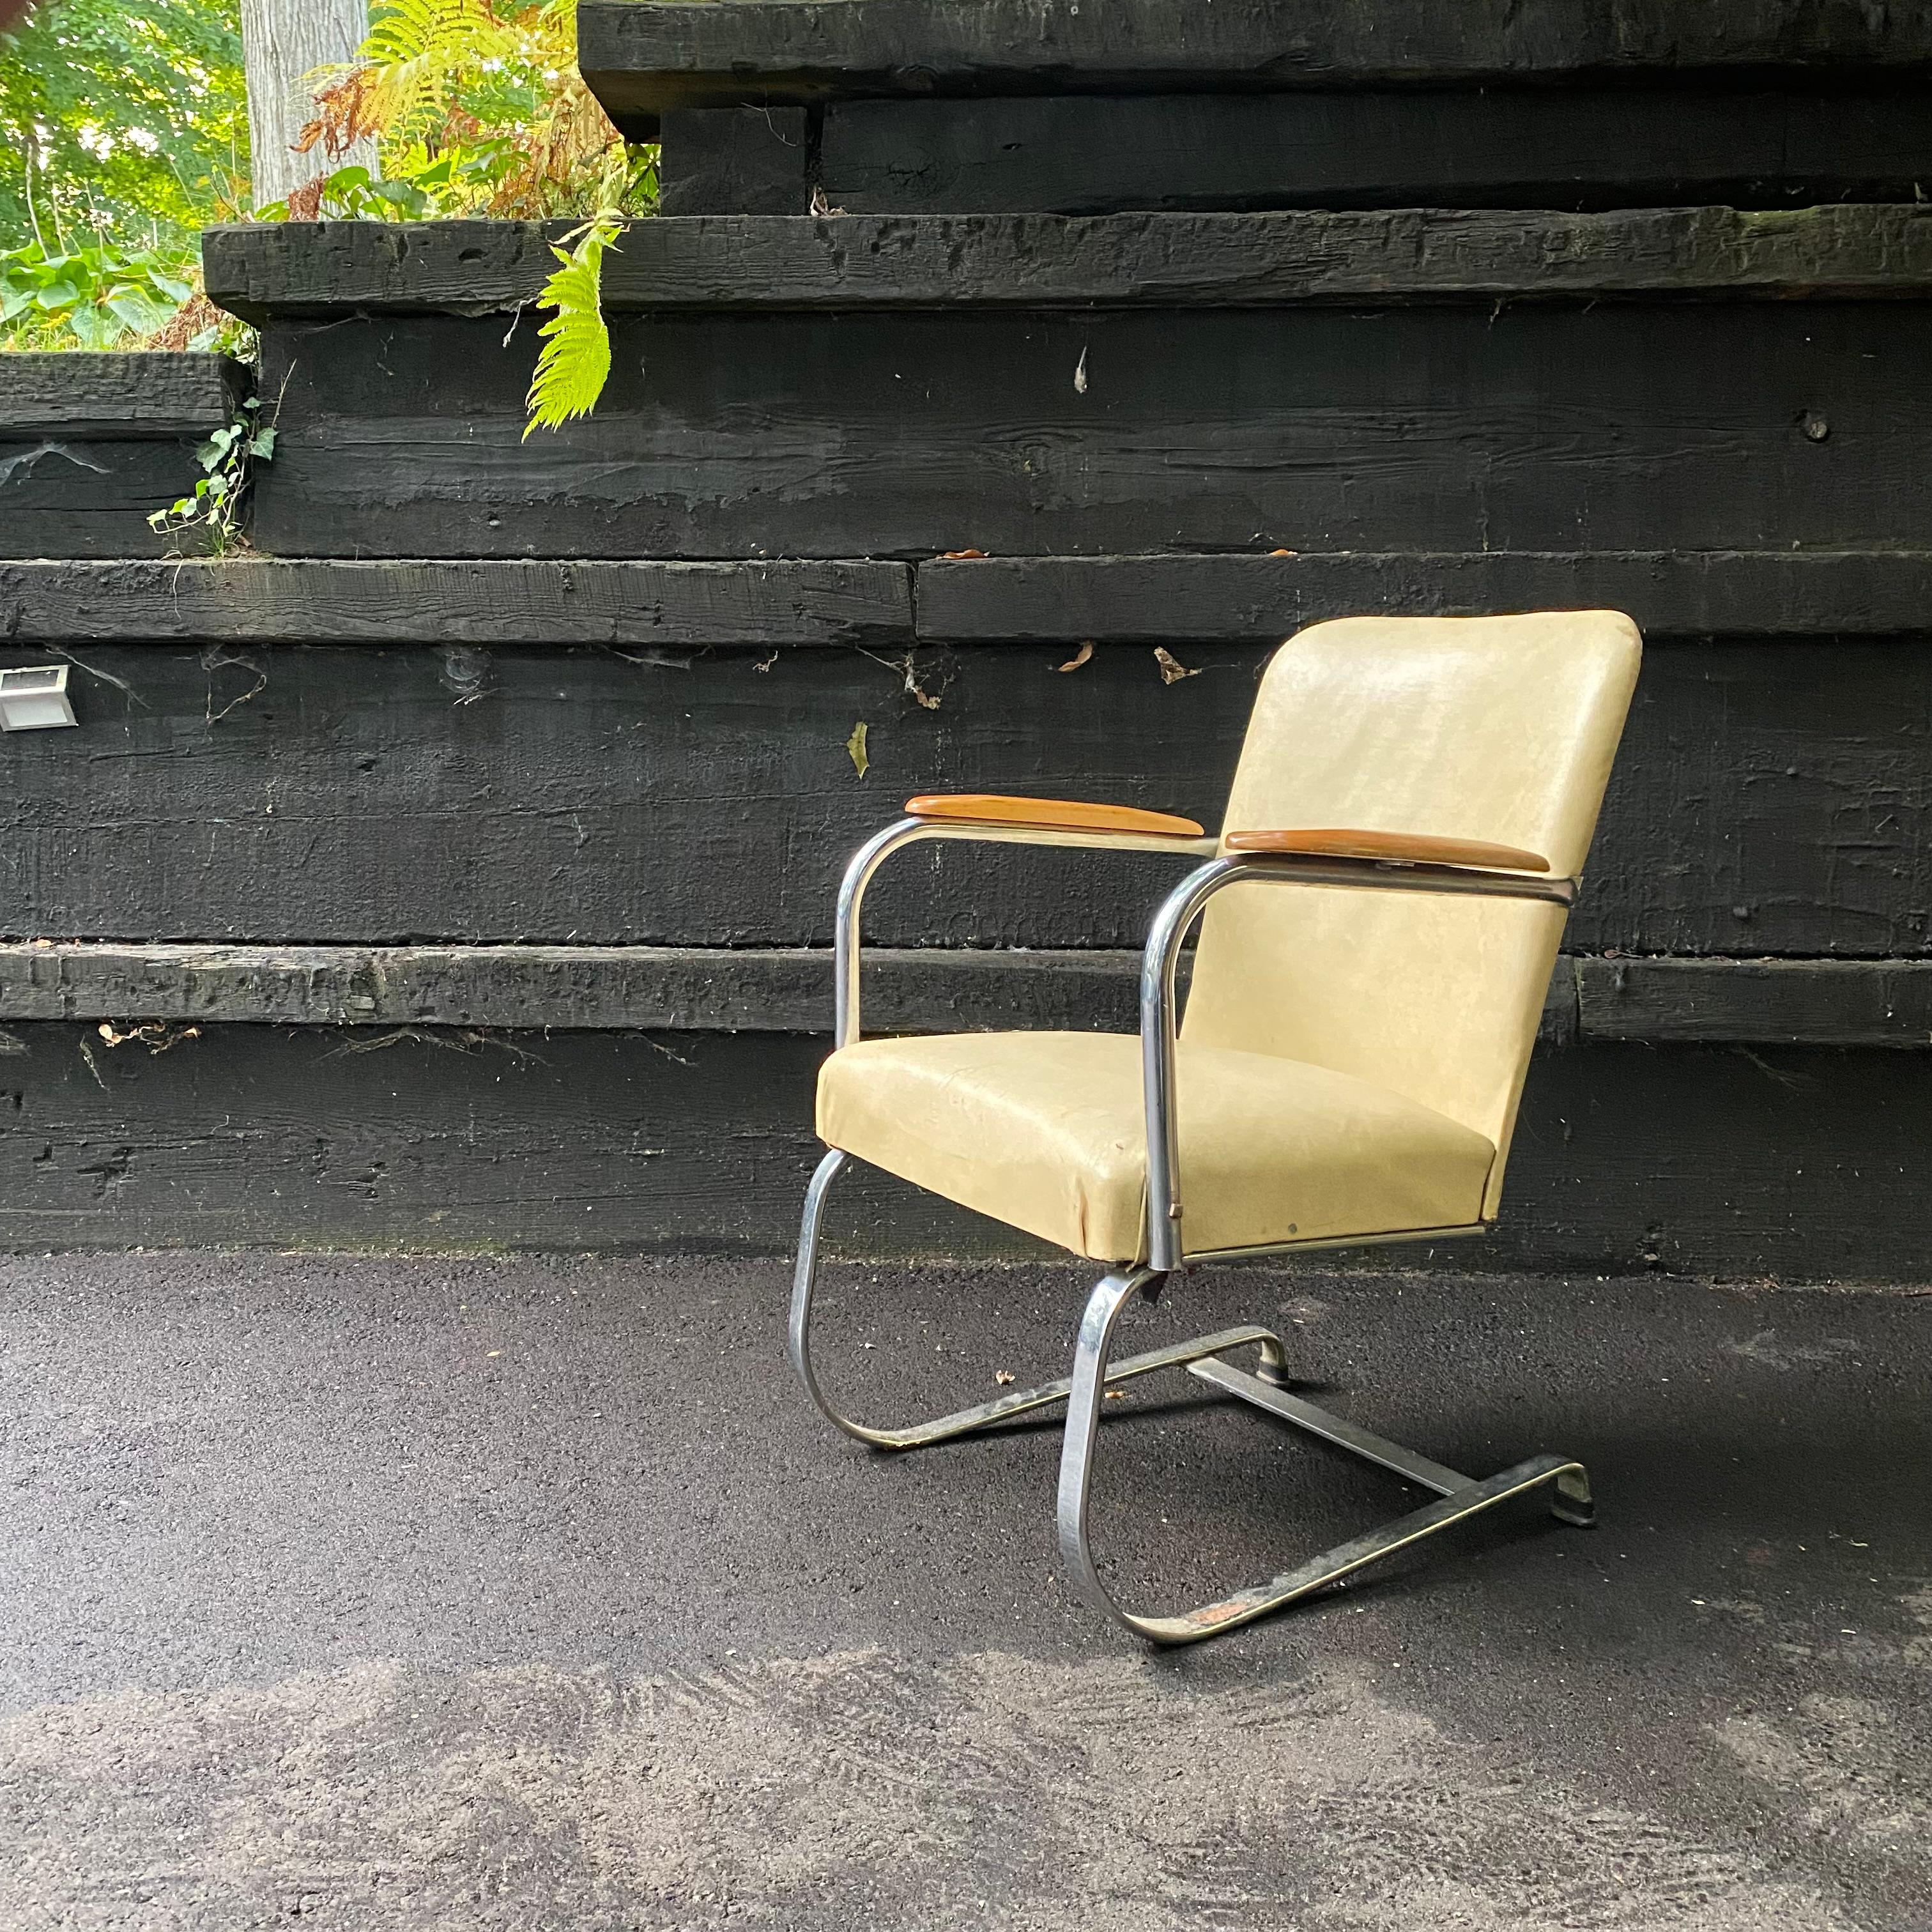 This is a beautiful spring cantilever chrome lounge chair with wood arms in yellow vinyl designed by Kem Weber for Lloyd Manufacturing Co, later Heywood Wakefield, ca. 1930's.

Condition: This chair is being offered as is either for restoration or